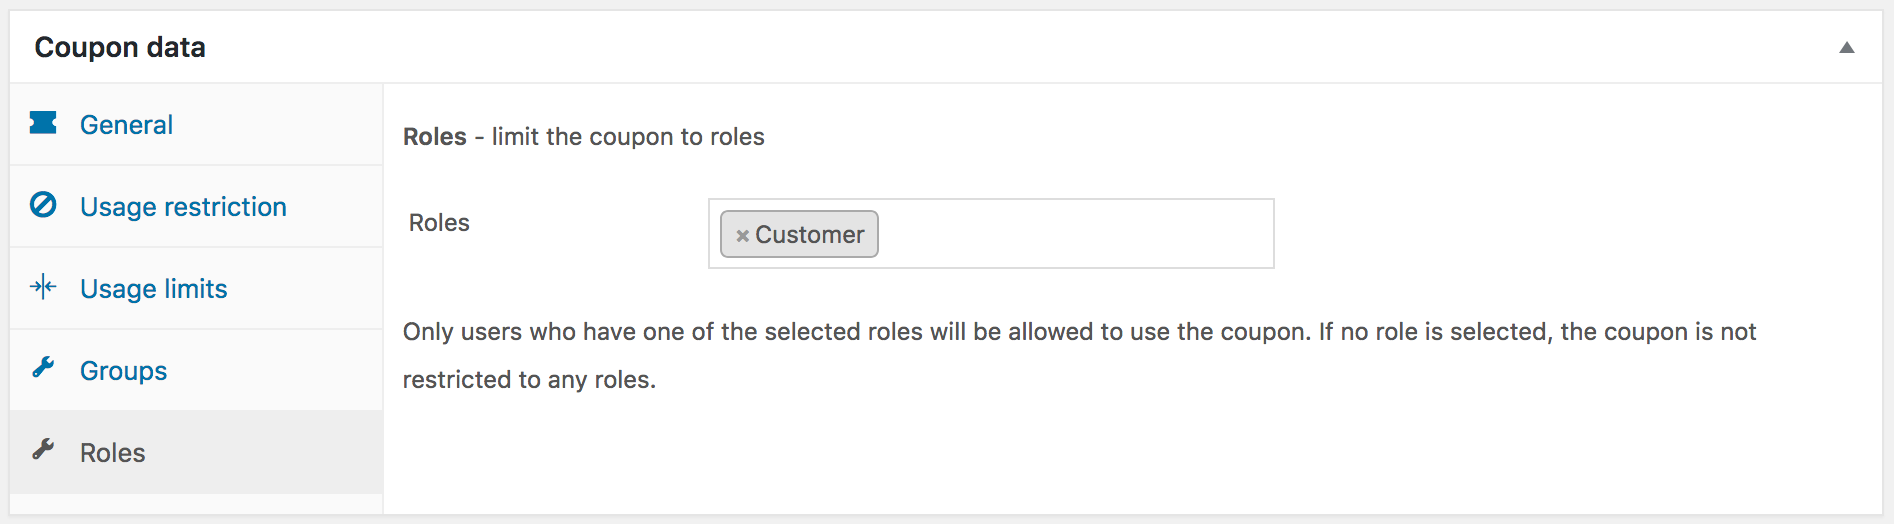 Settings for a coupon restricted to the Customer role